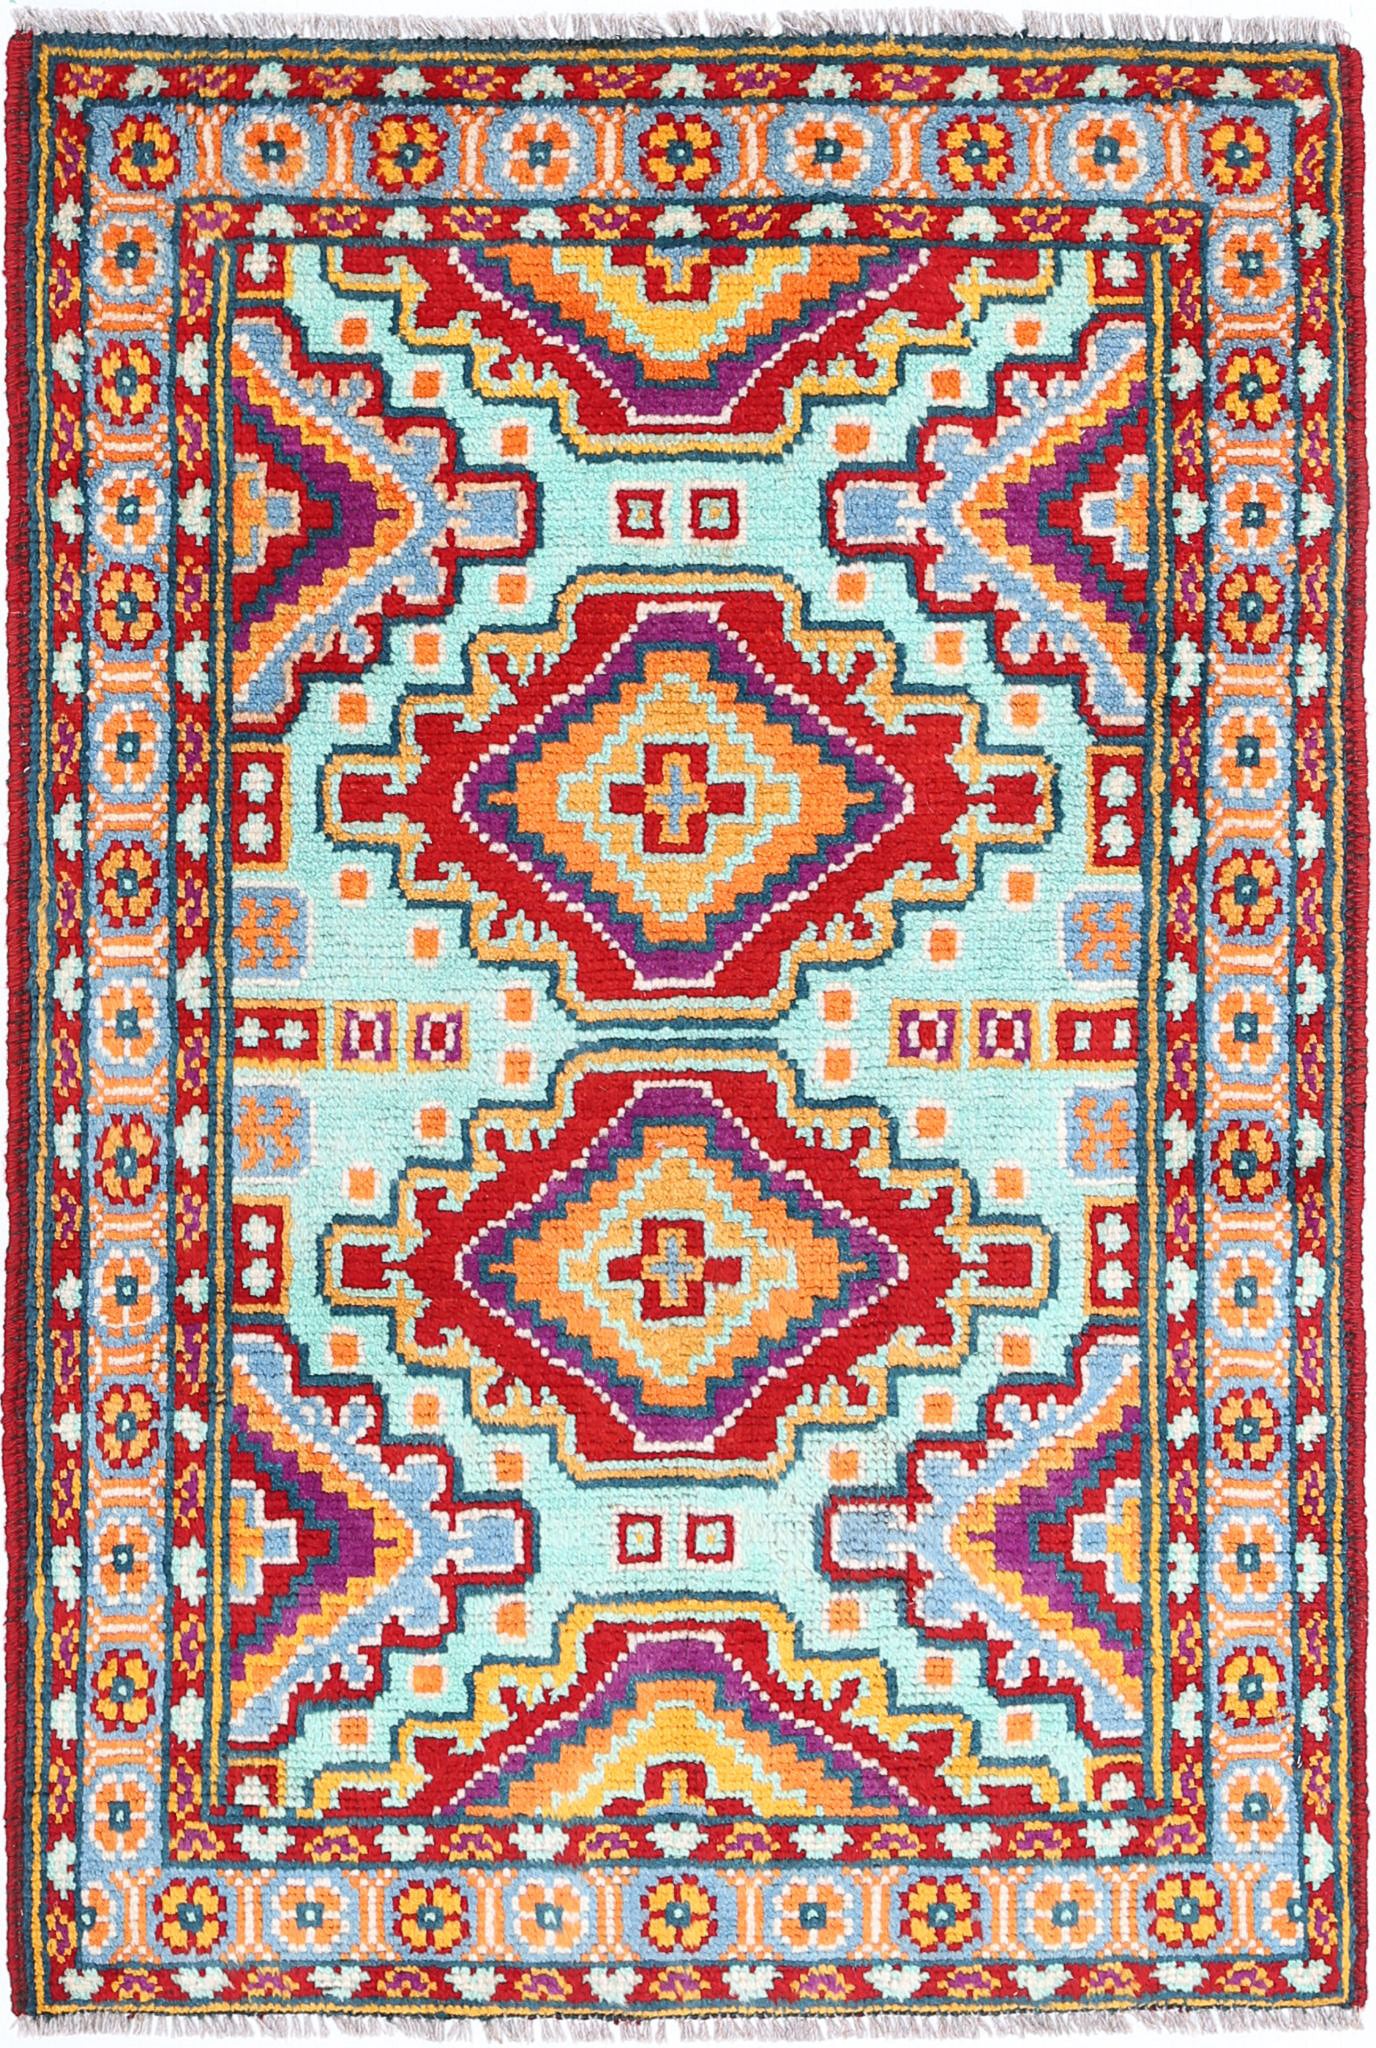 Revival-hand-knotted-qarghani-wool-rug-5014196.jpg